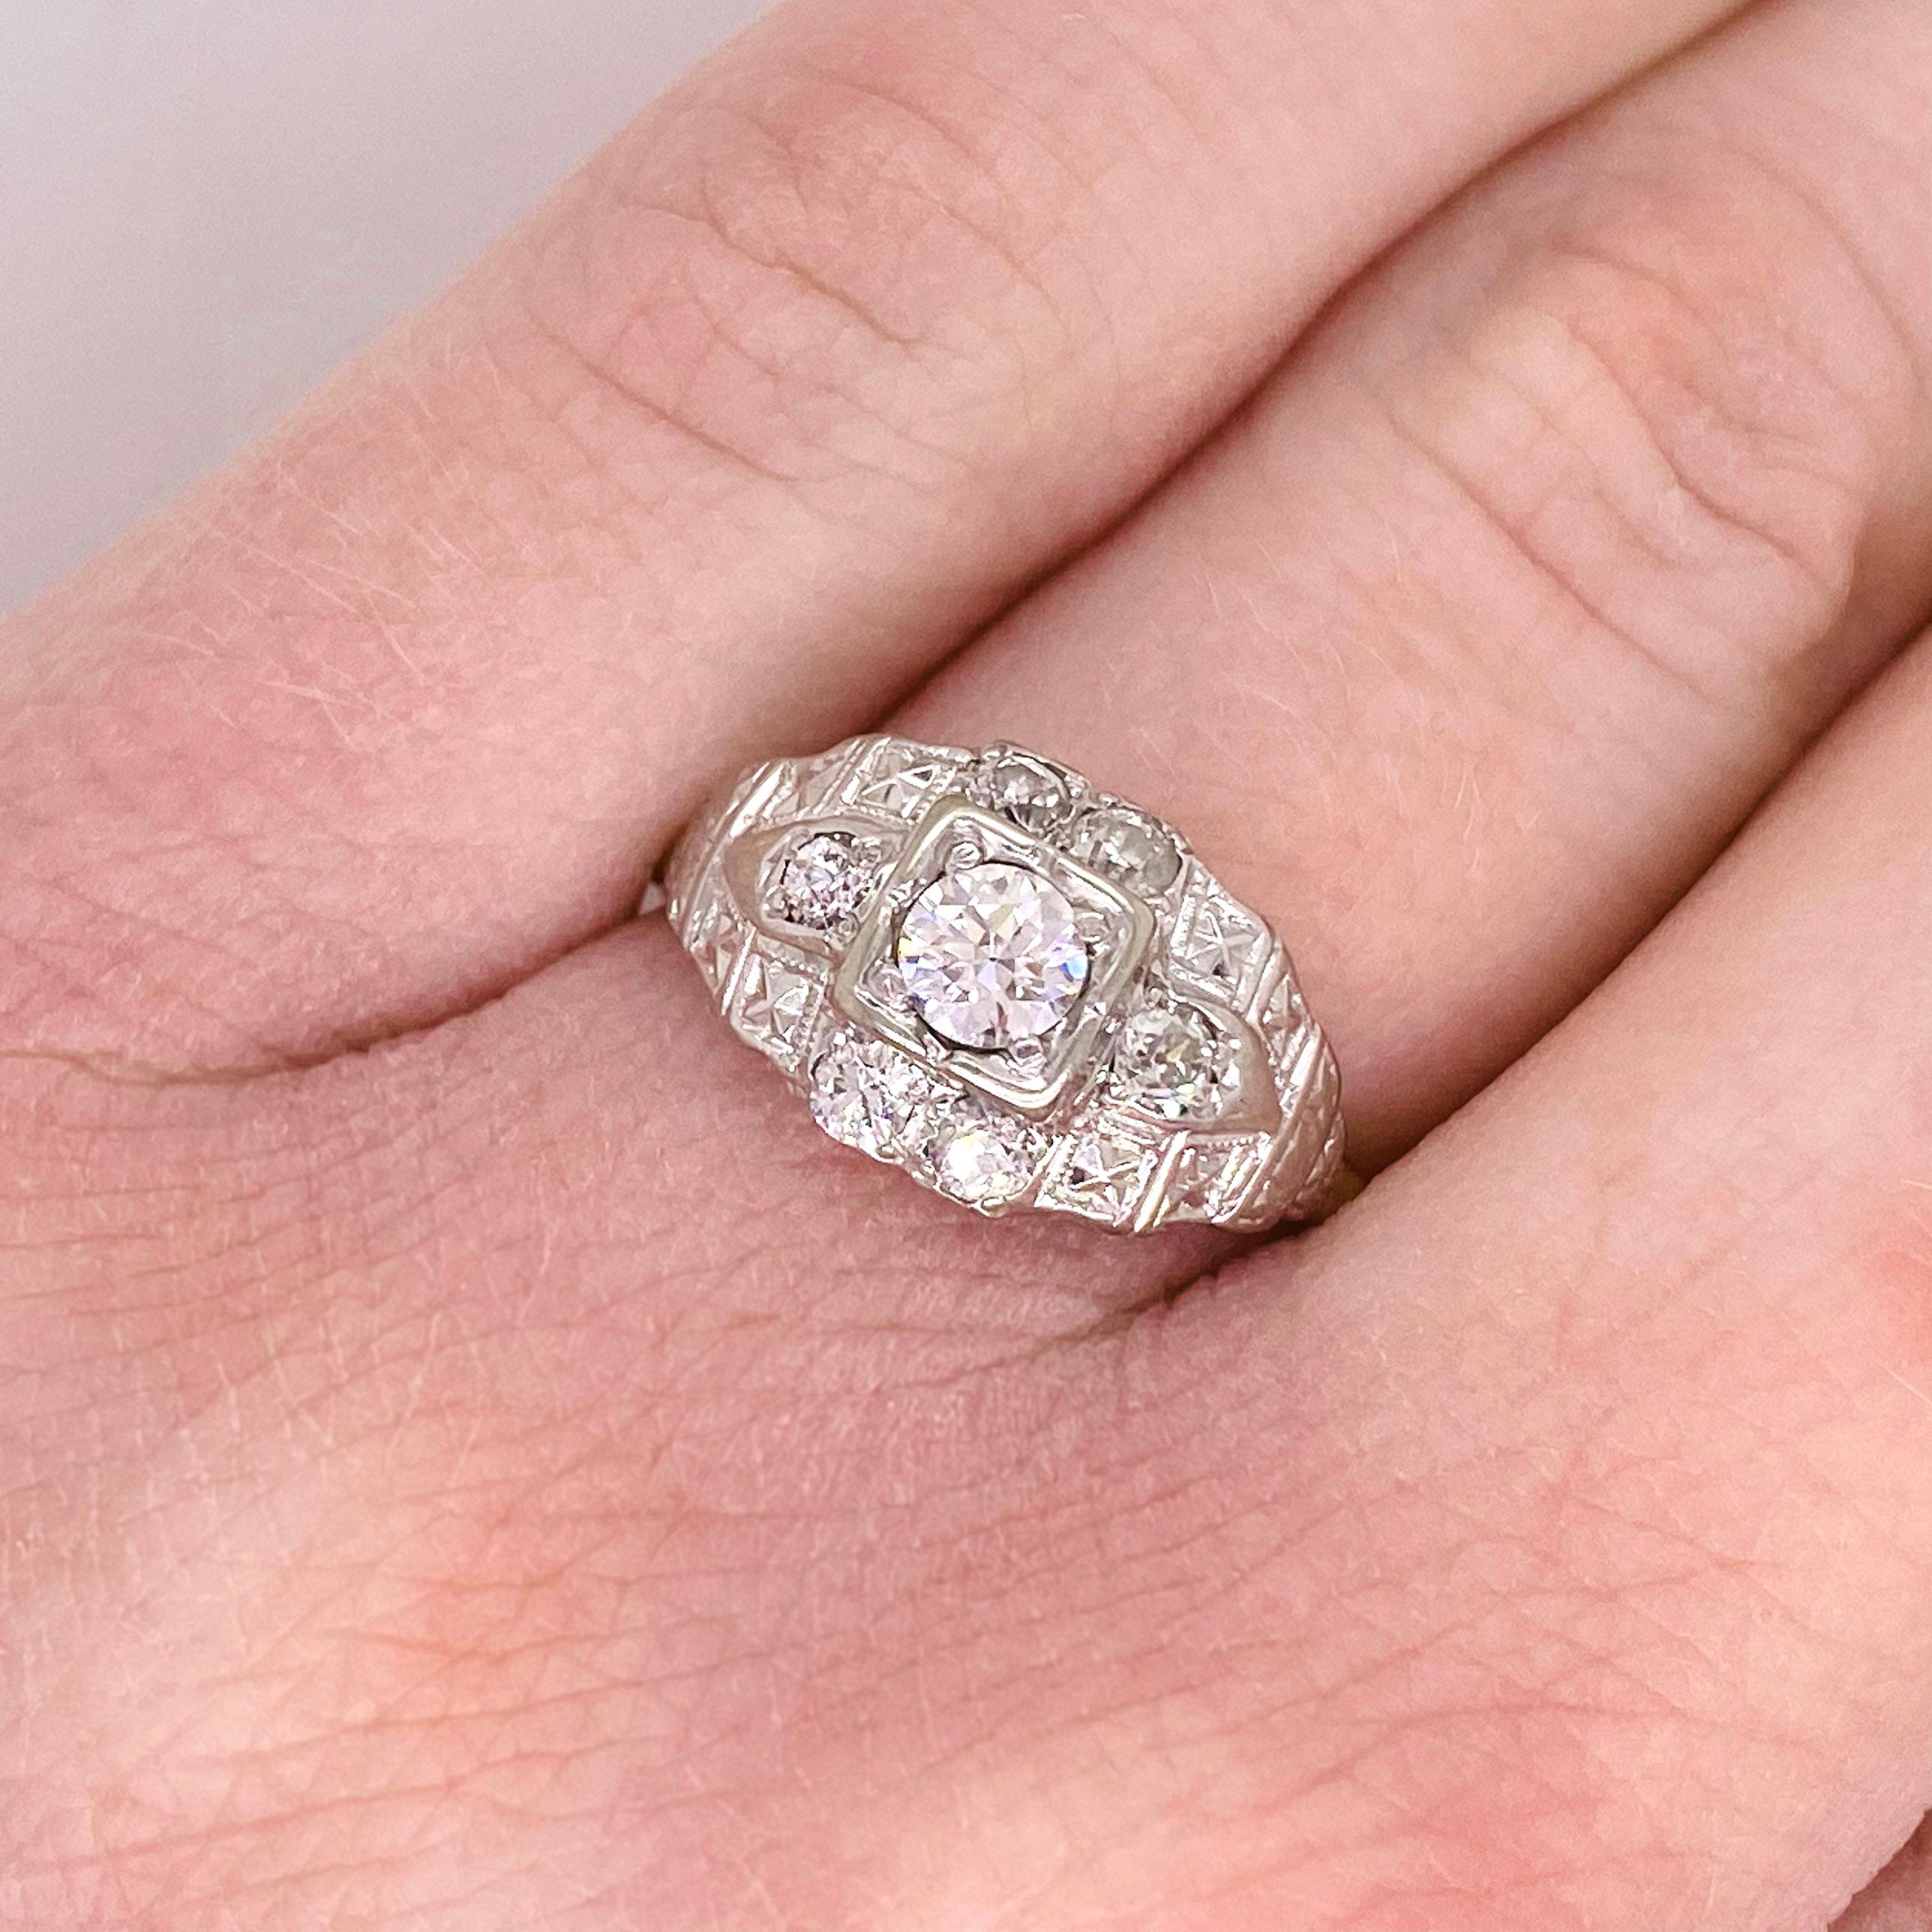 Art Deco Wedding Band is gorgeous with high quality diamonds and a lovely design.  There is a larger diamond in the center with six other accent diamonds.  The top of the ring is handmade in 14 karat white gold and the band (shank) is in 14 karat